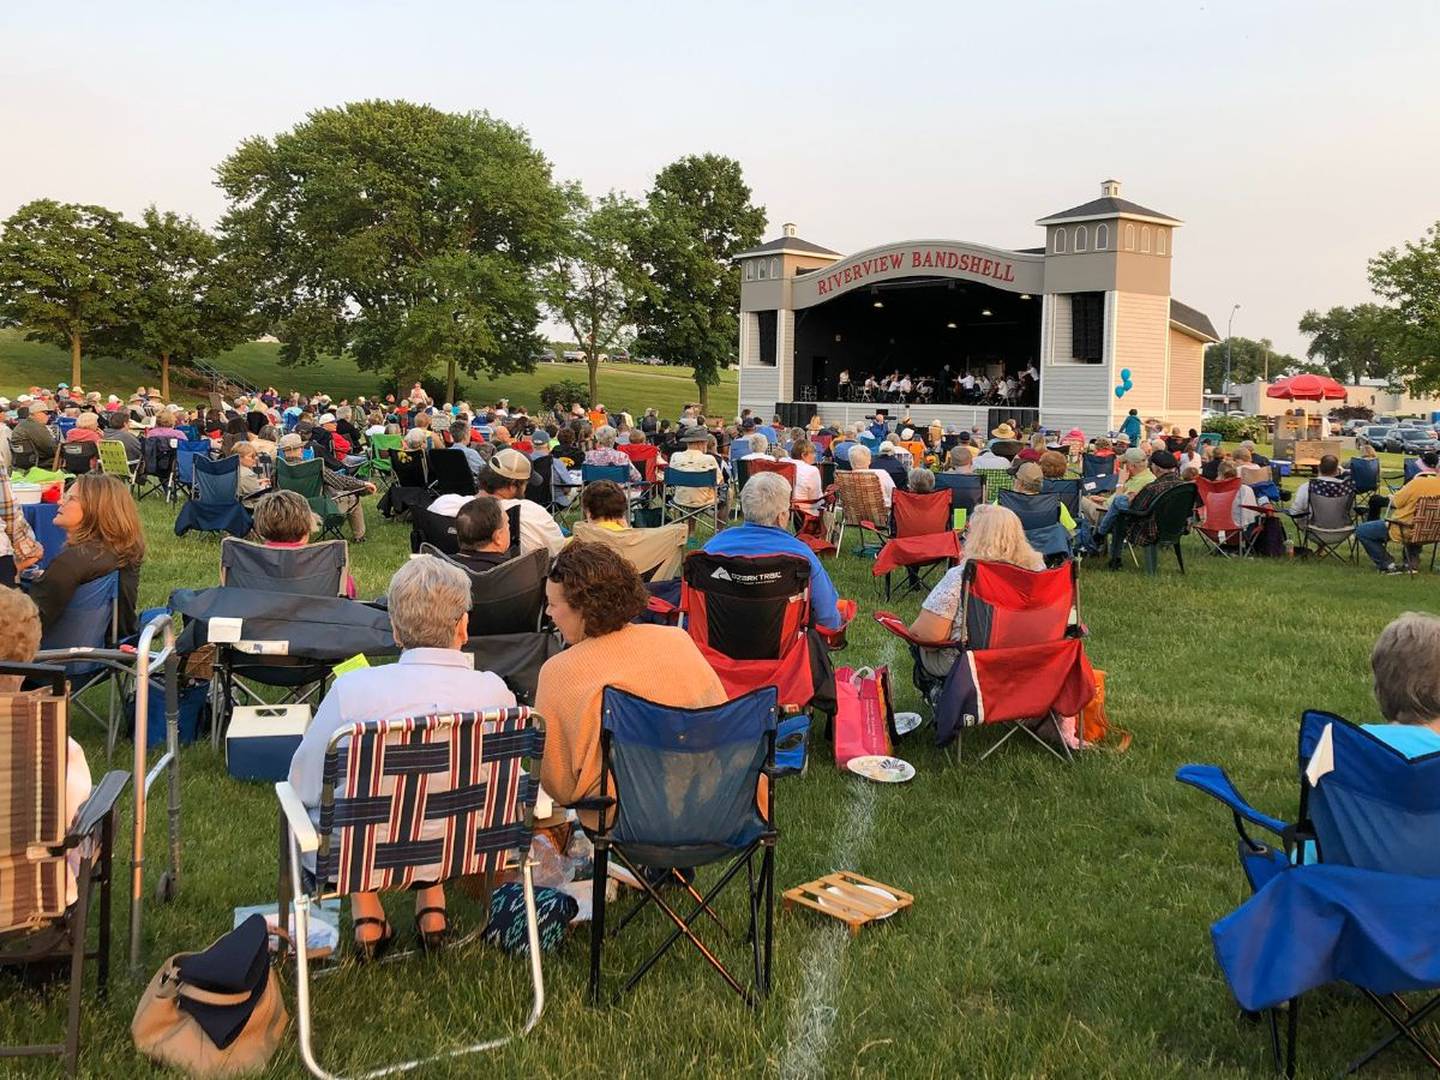 A crowd in lawn chairs gathers for the Clinton Symphony Orchestra's Pops Concert in an undated photo at the Riverview Bandshell in Clinton, Iowa.